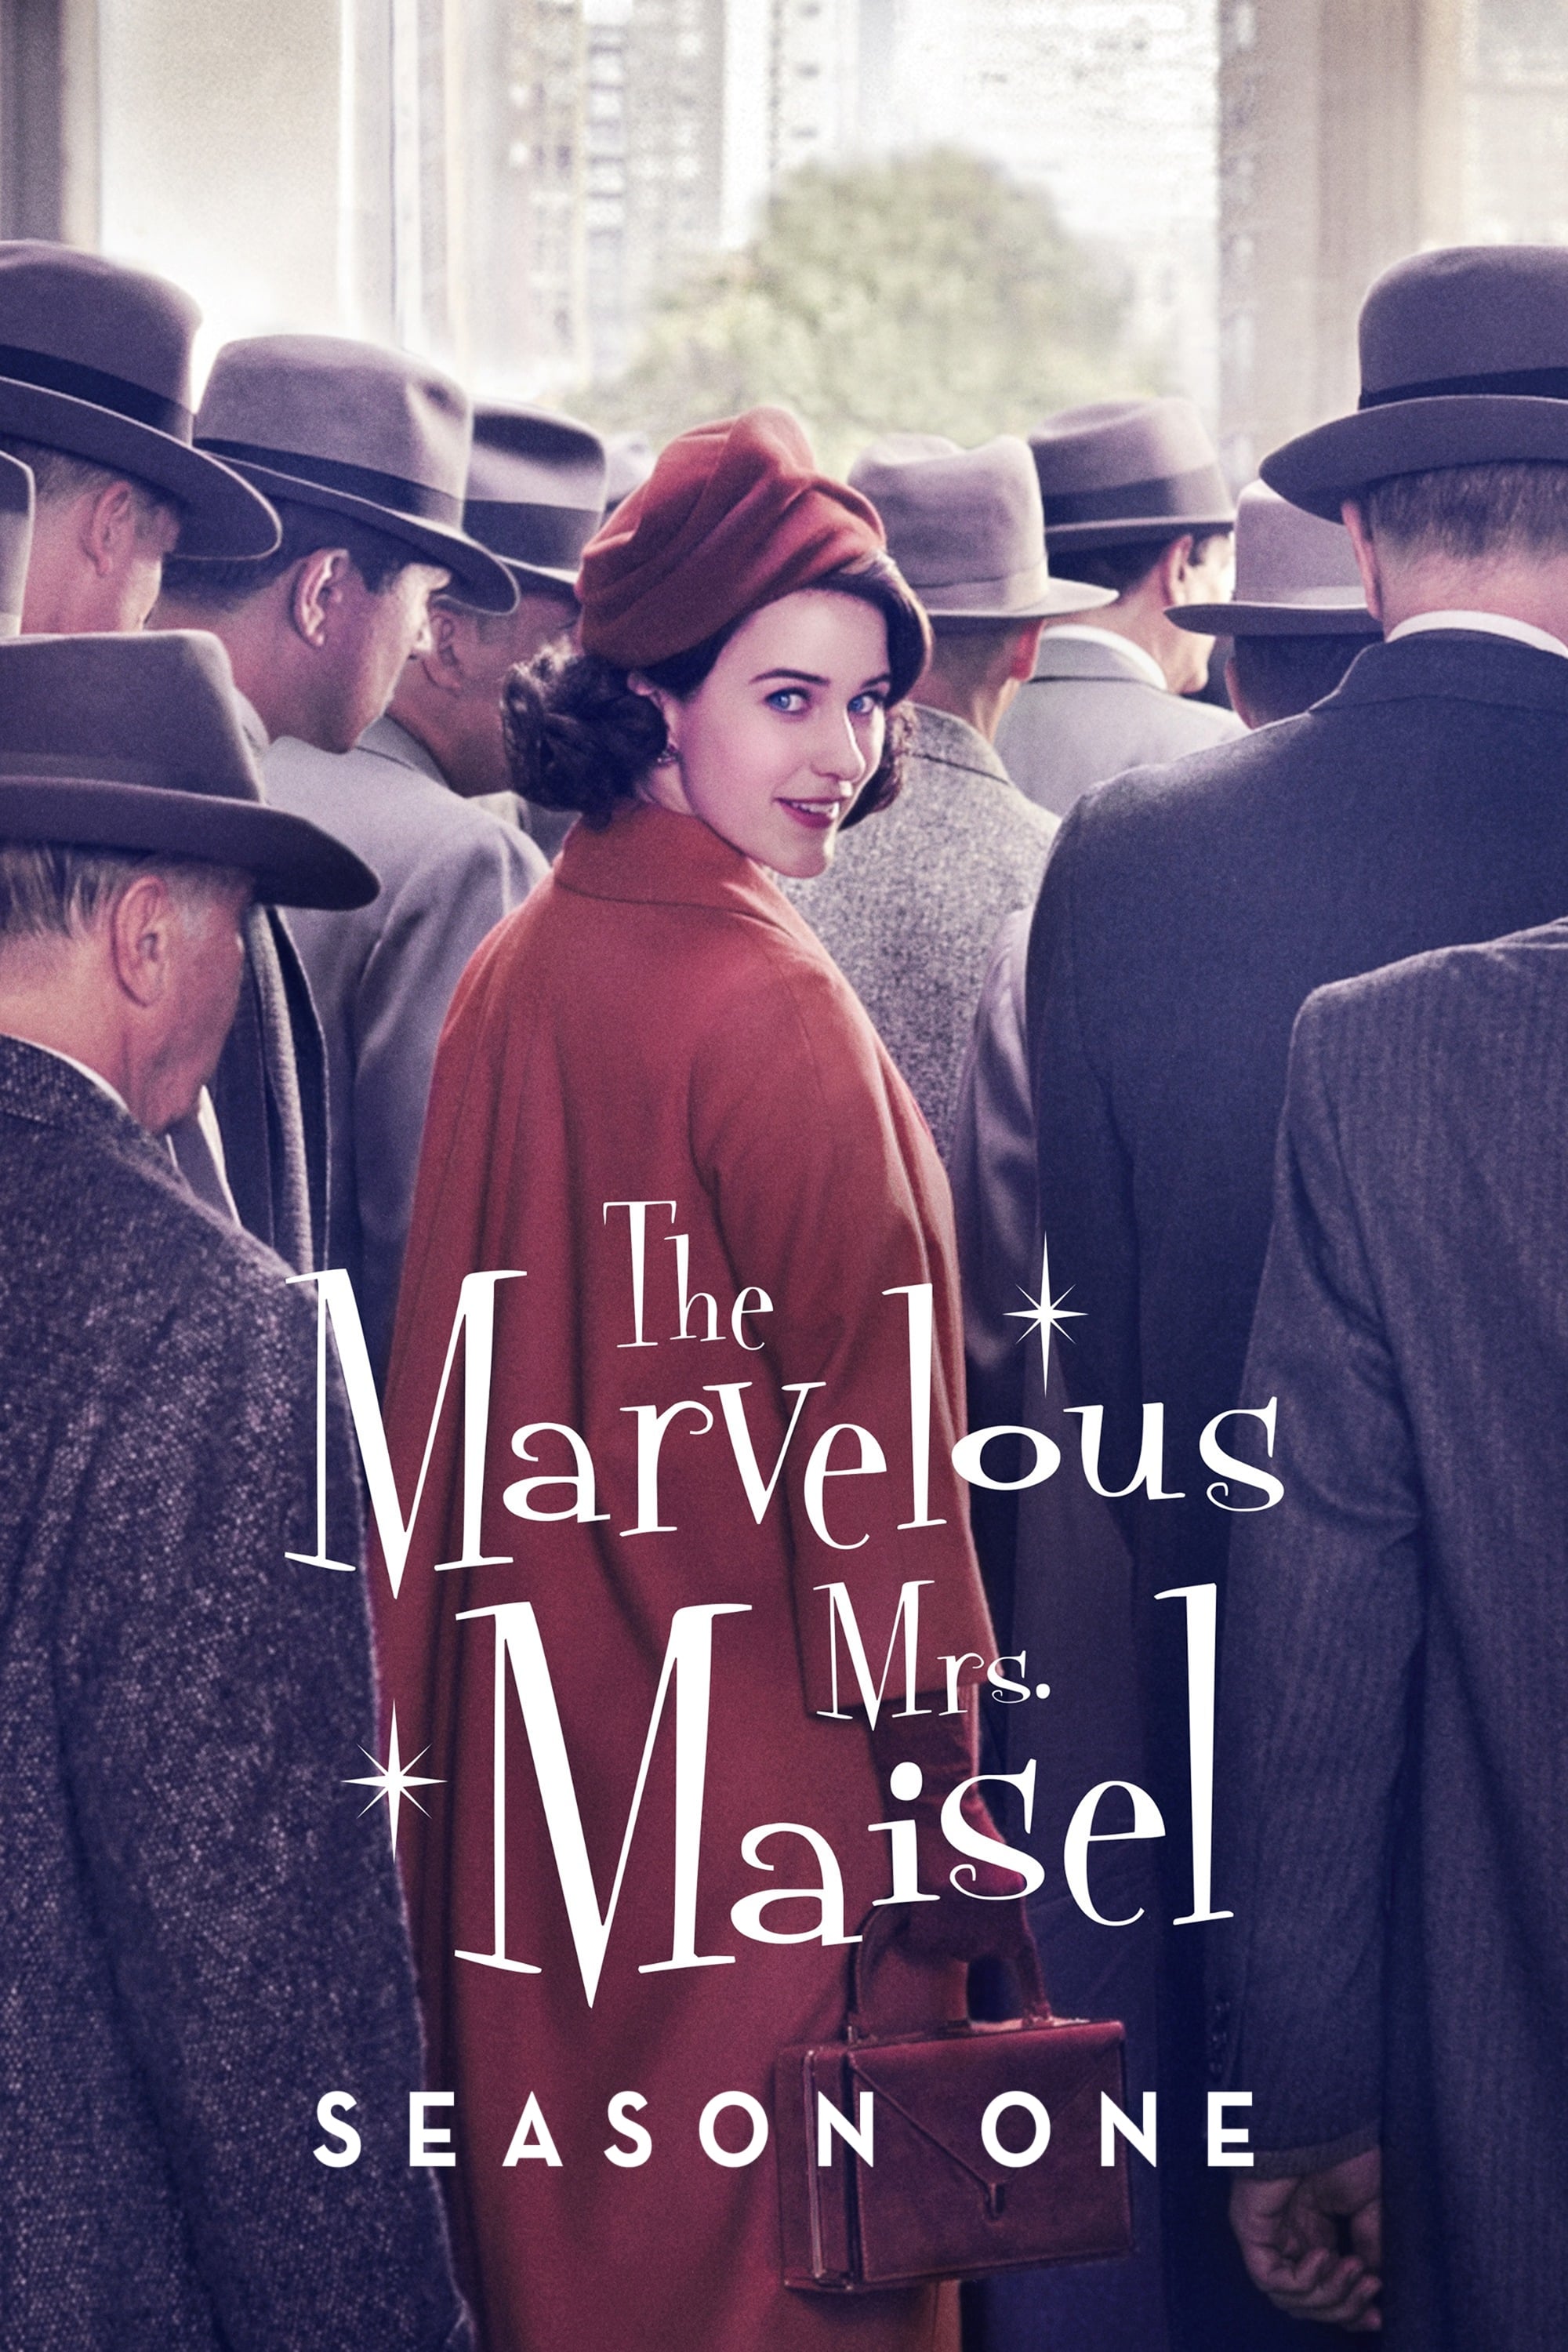 The Marvelous Mrs. Maisel 2017 S01 Complete Hindi ORG Dual Audio 720p HDRip ESub 3.52GB Download